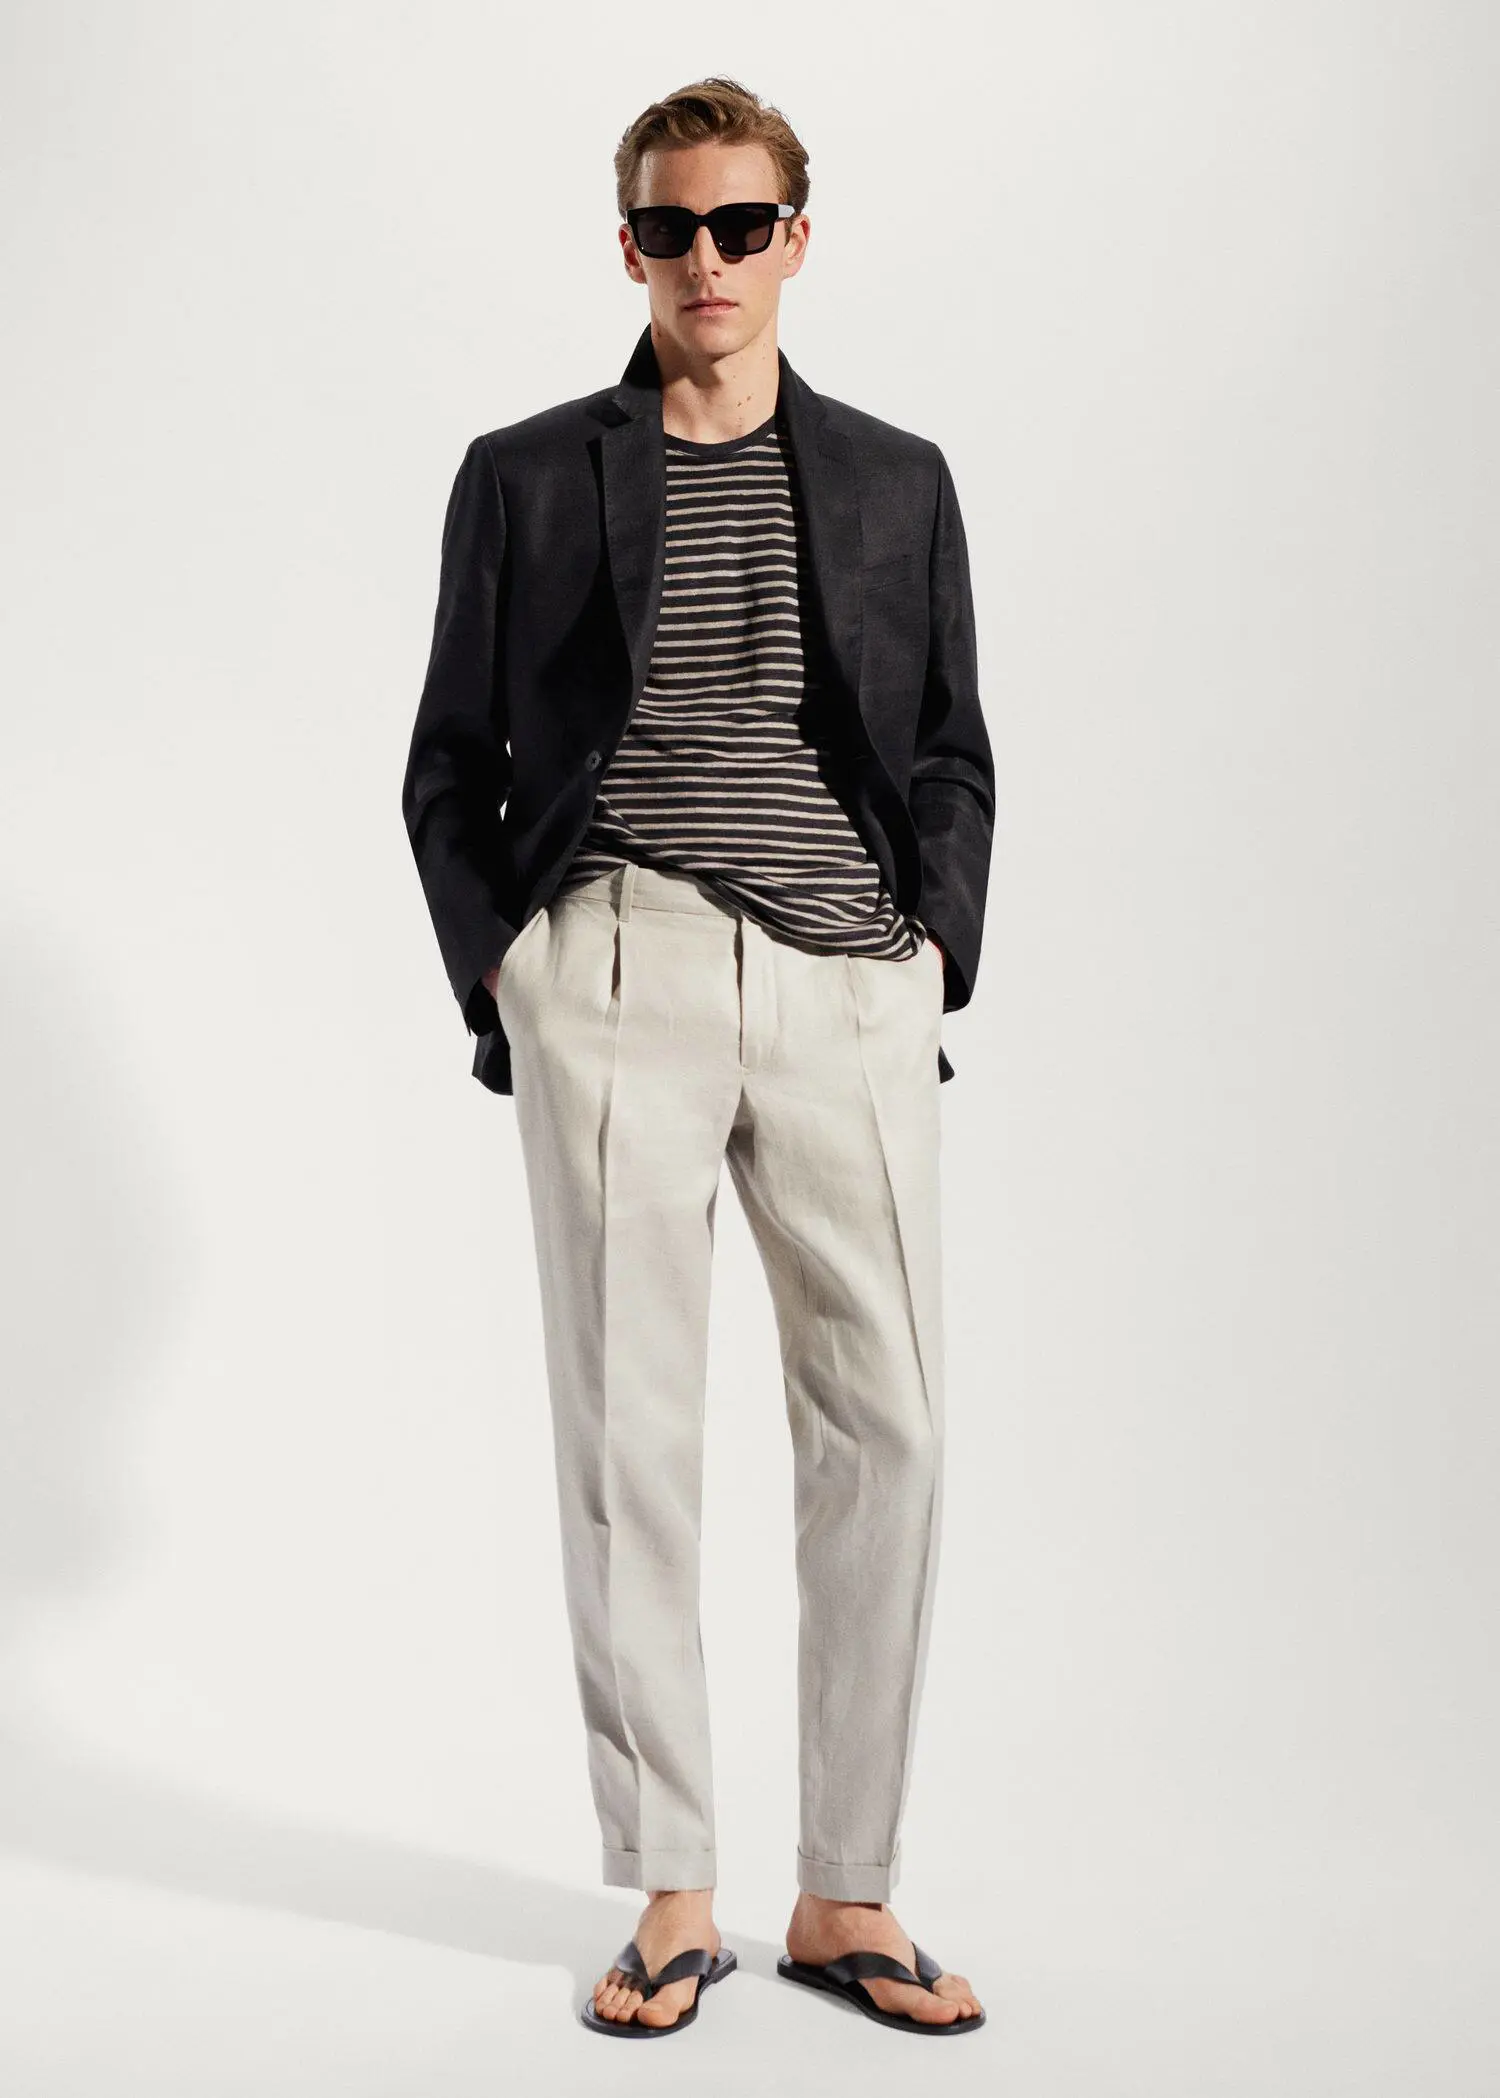 Mango 100% linen striped t-shirt. a man in a black jacket and white pants. 